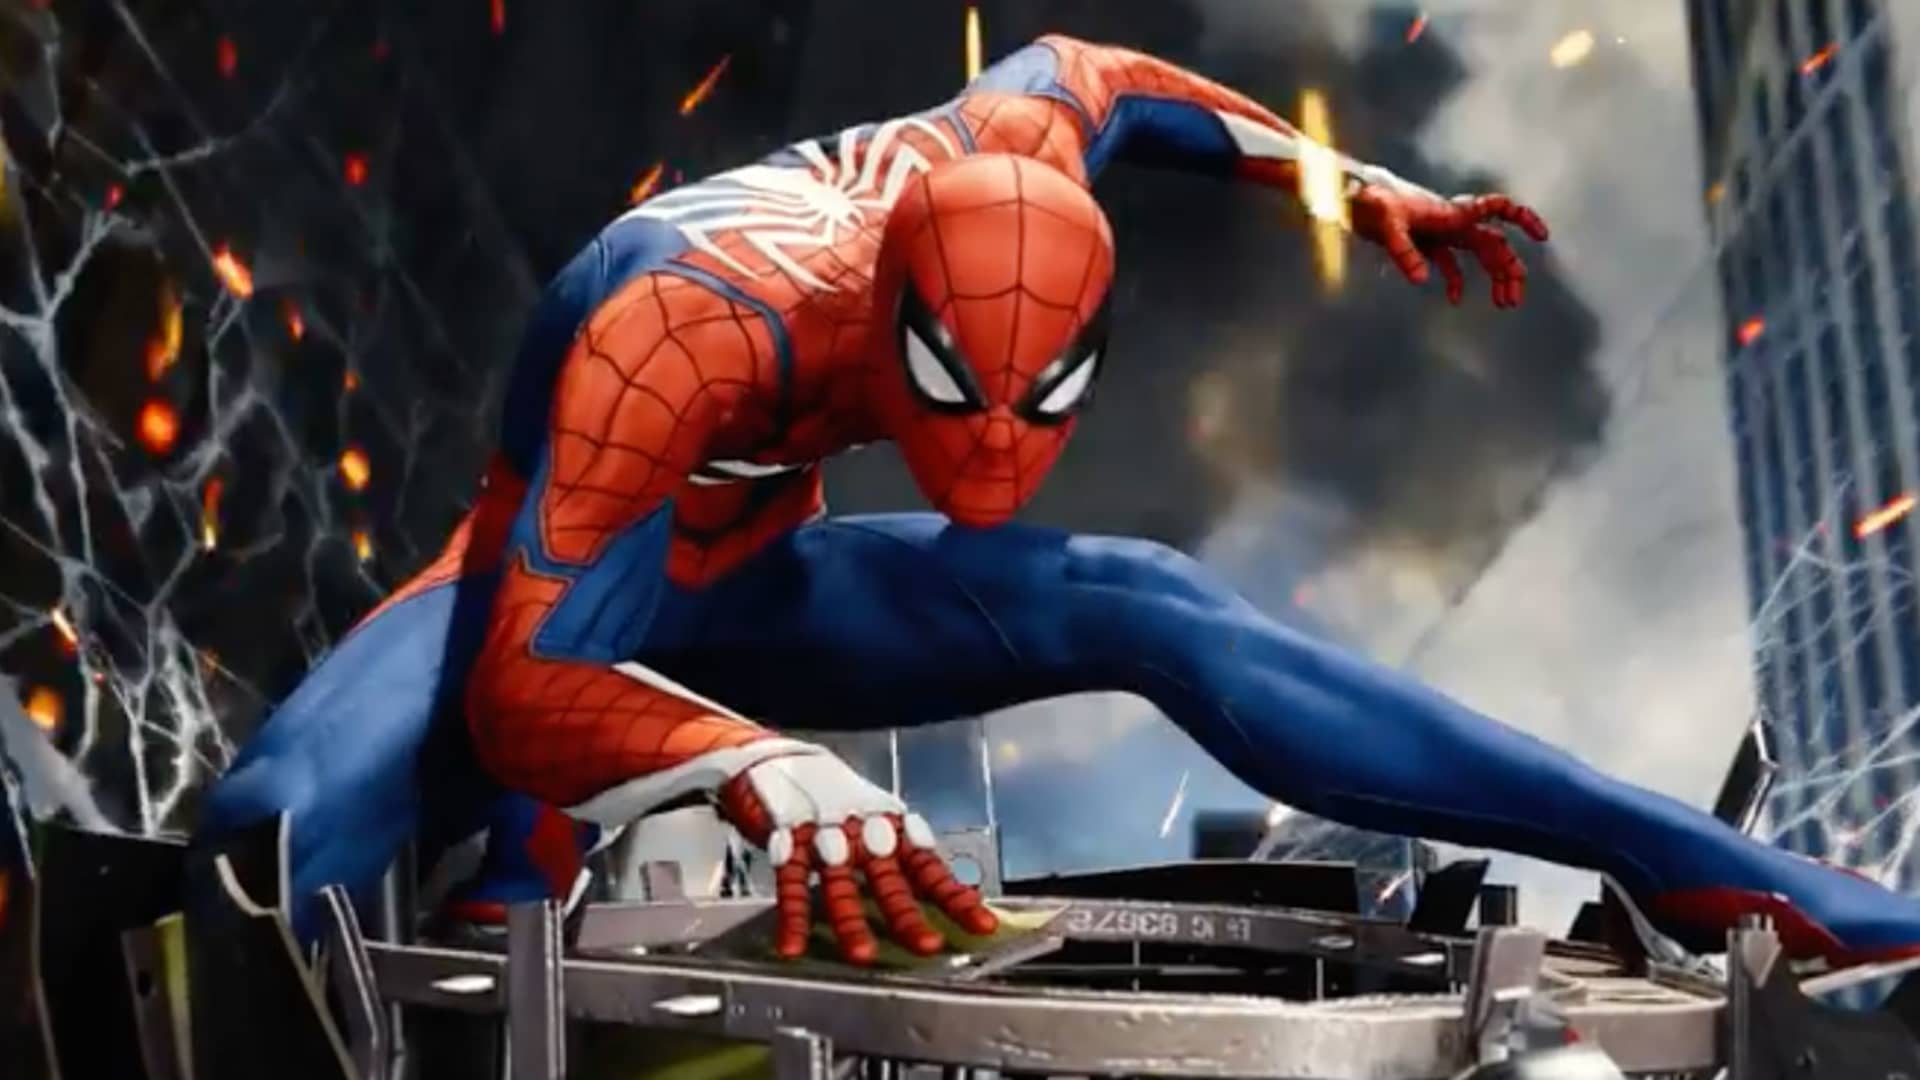 Marvel's Spider-Man 2' game breaks 24-hour PlayStation Studios record